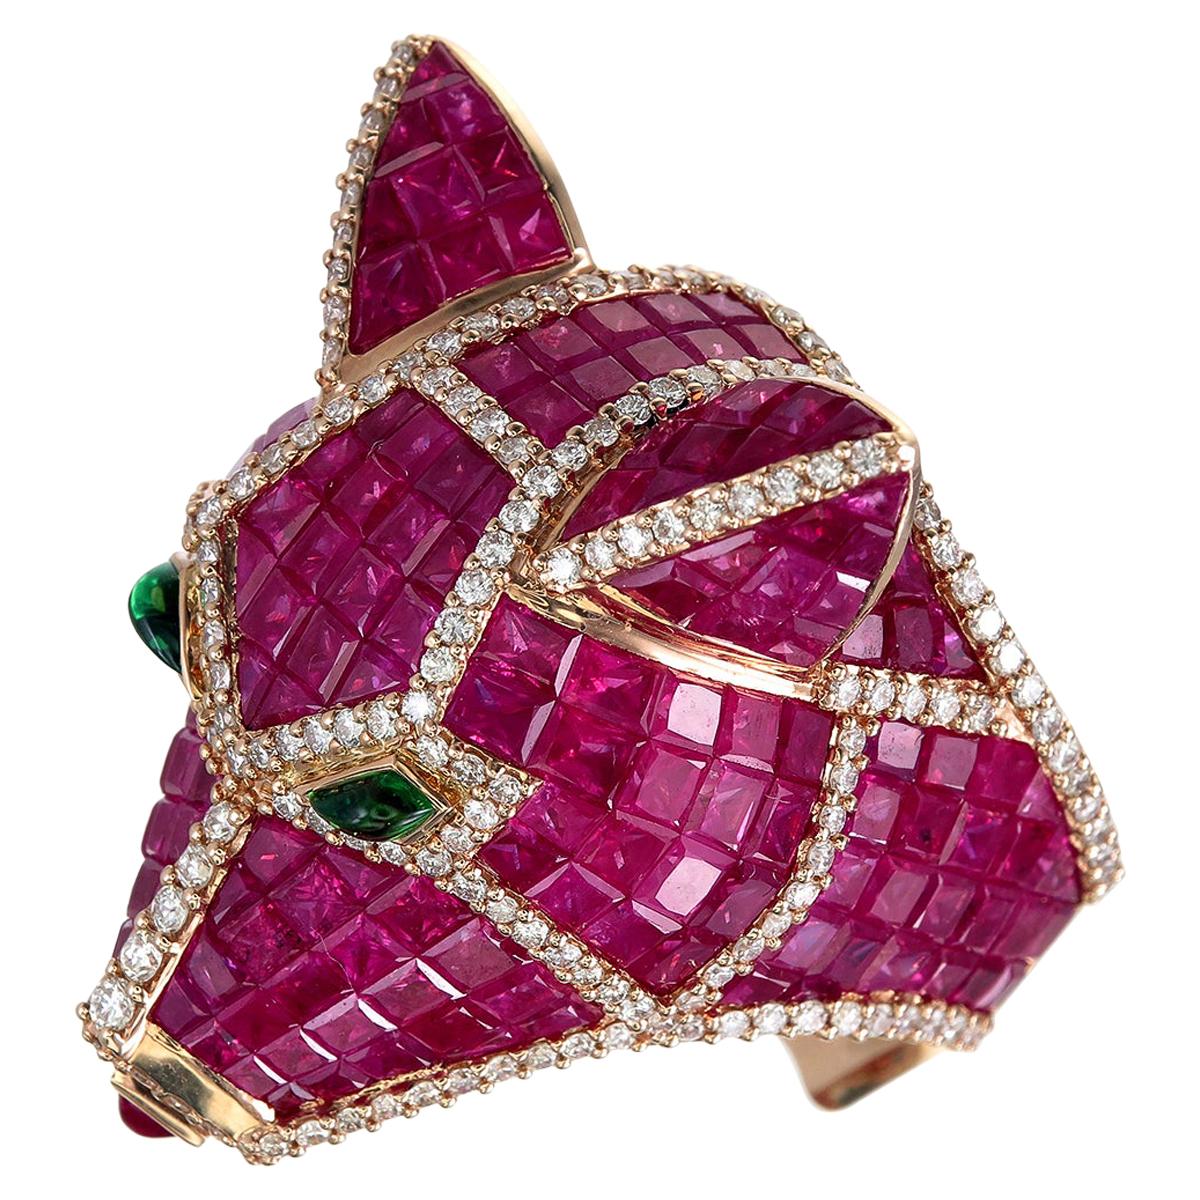 Zorab Creation 44.29-Carat Ruby and Diamond Red Bear Ring For Sale